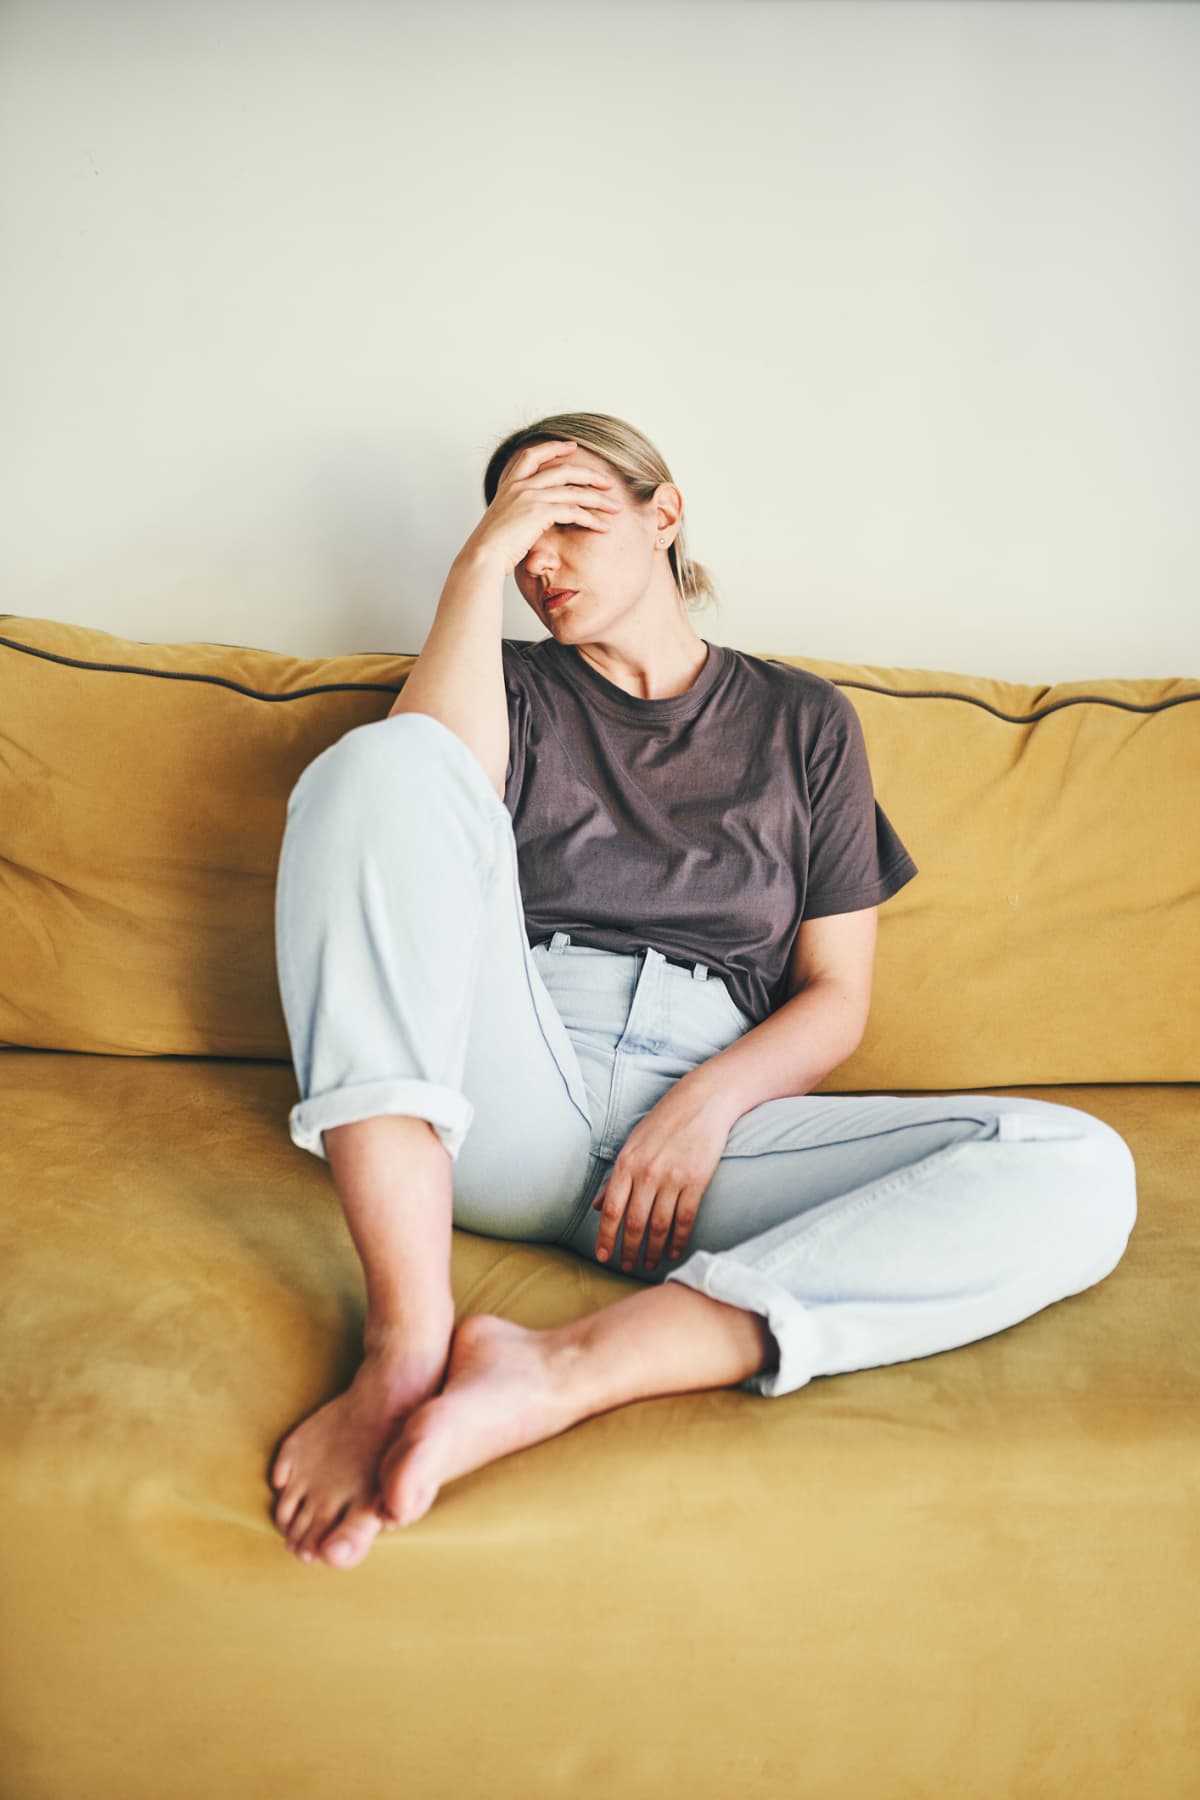 Woman looks frustrated as she sits on a couch with her head in her hand